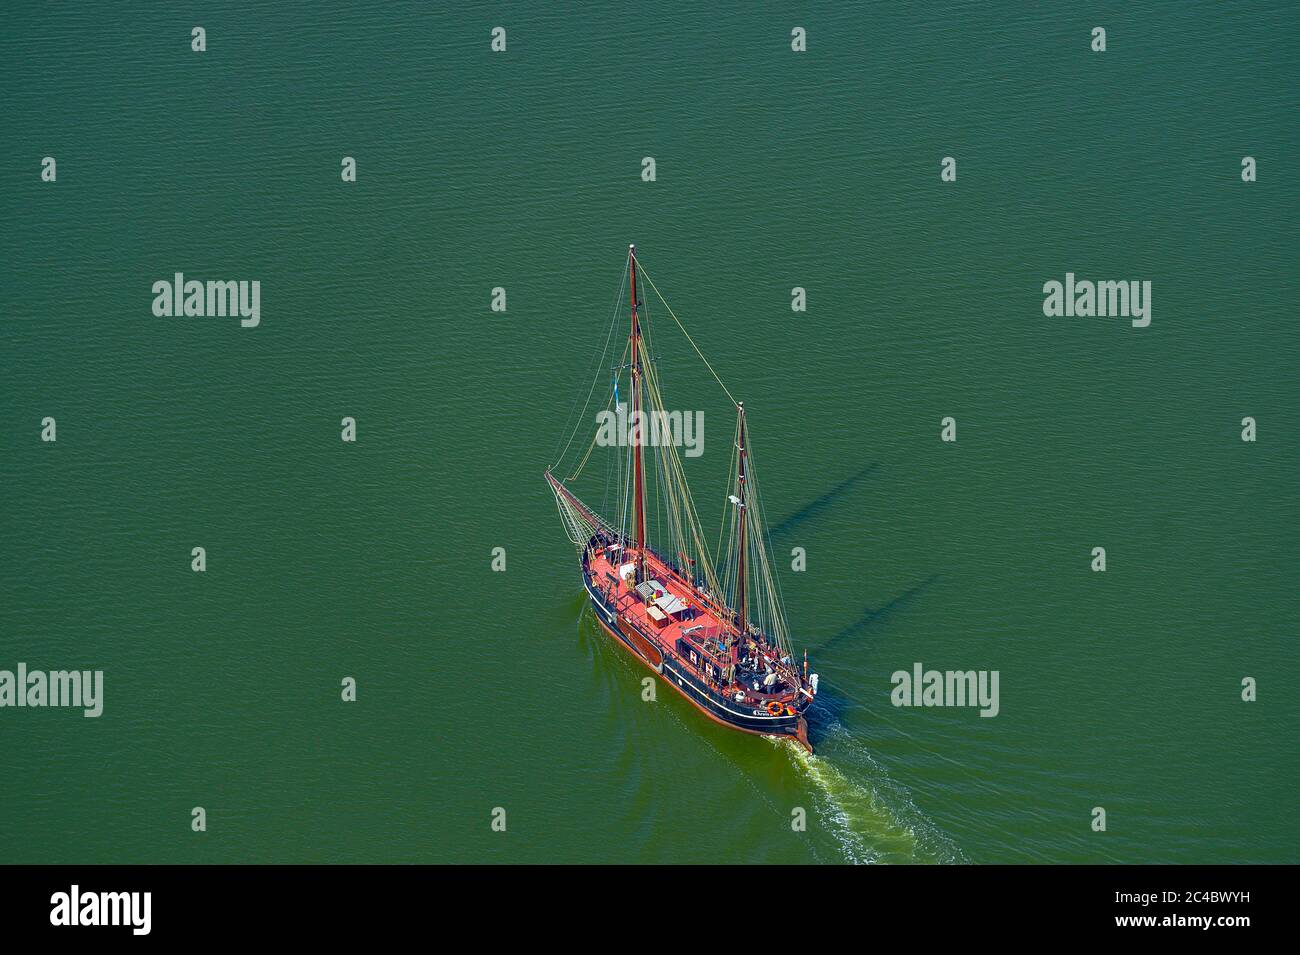 sailing ship on river Schlei, aerial view, Germany, Schleswig-Holstein Stock Photo